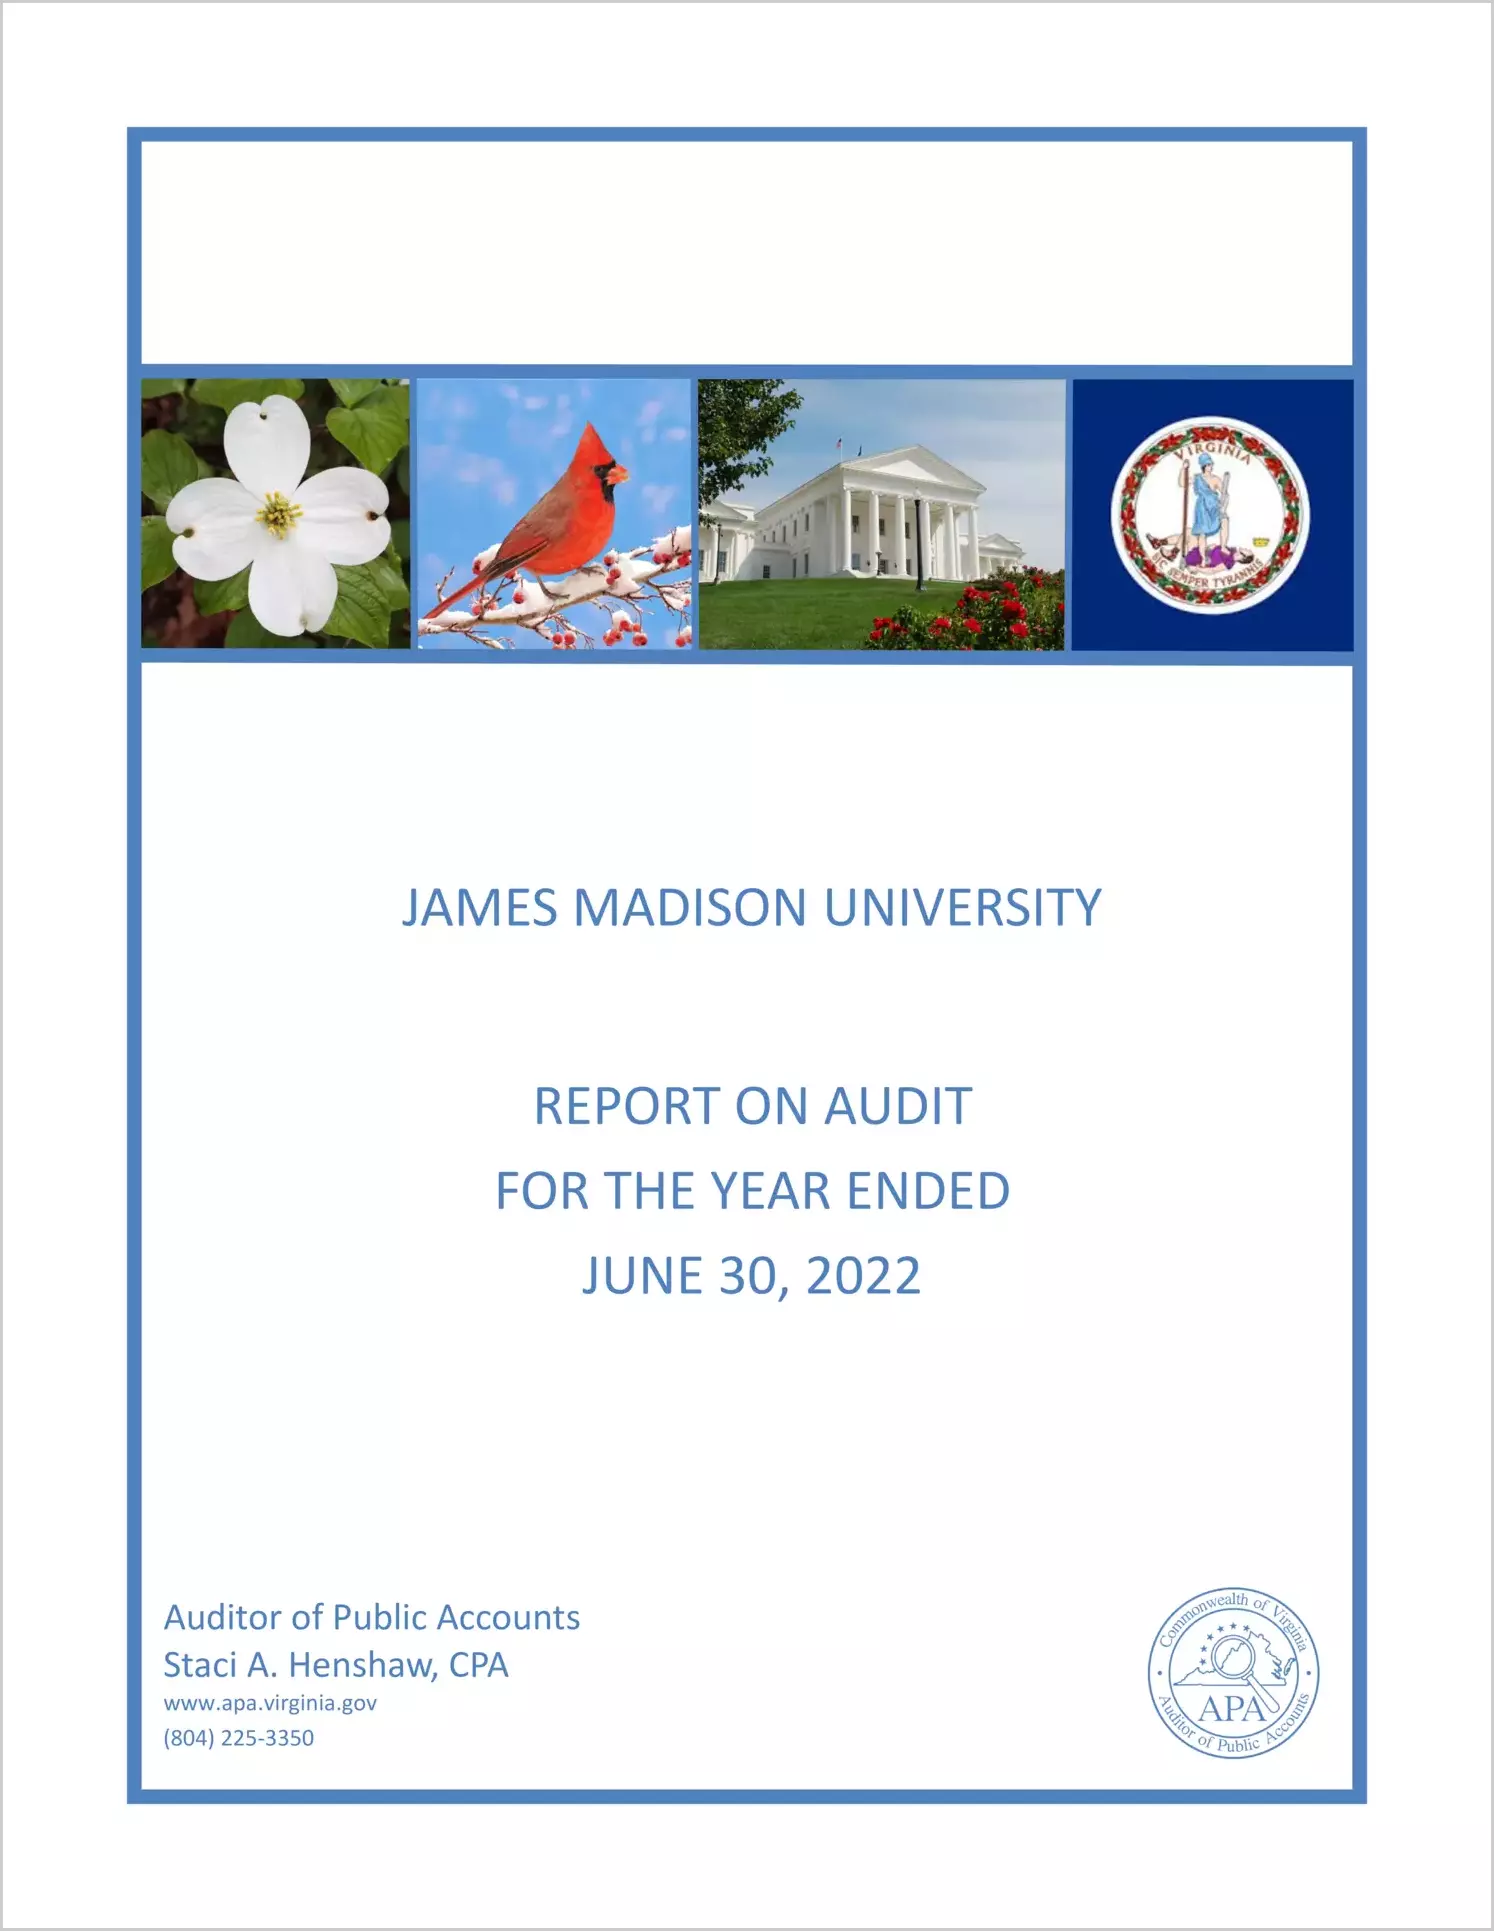 James Madison University for the year ended June 30, 2022